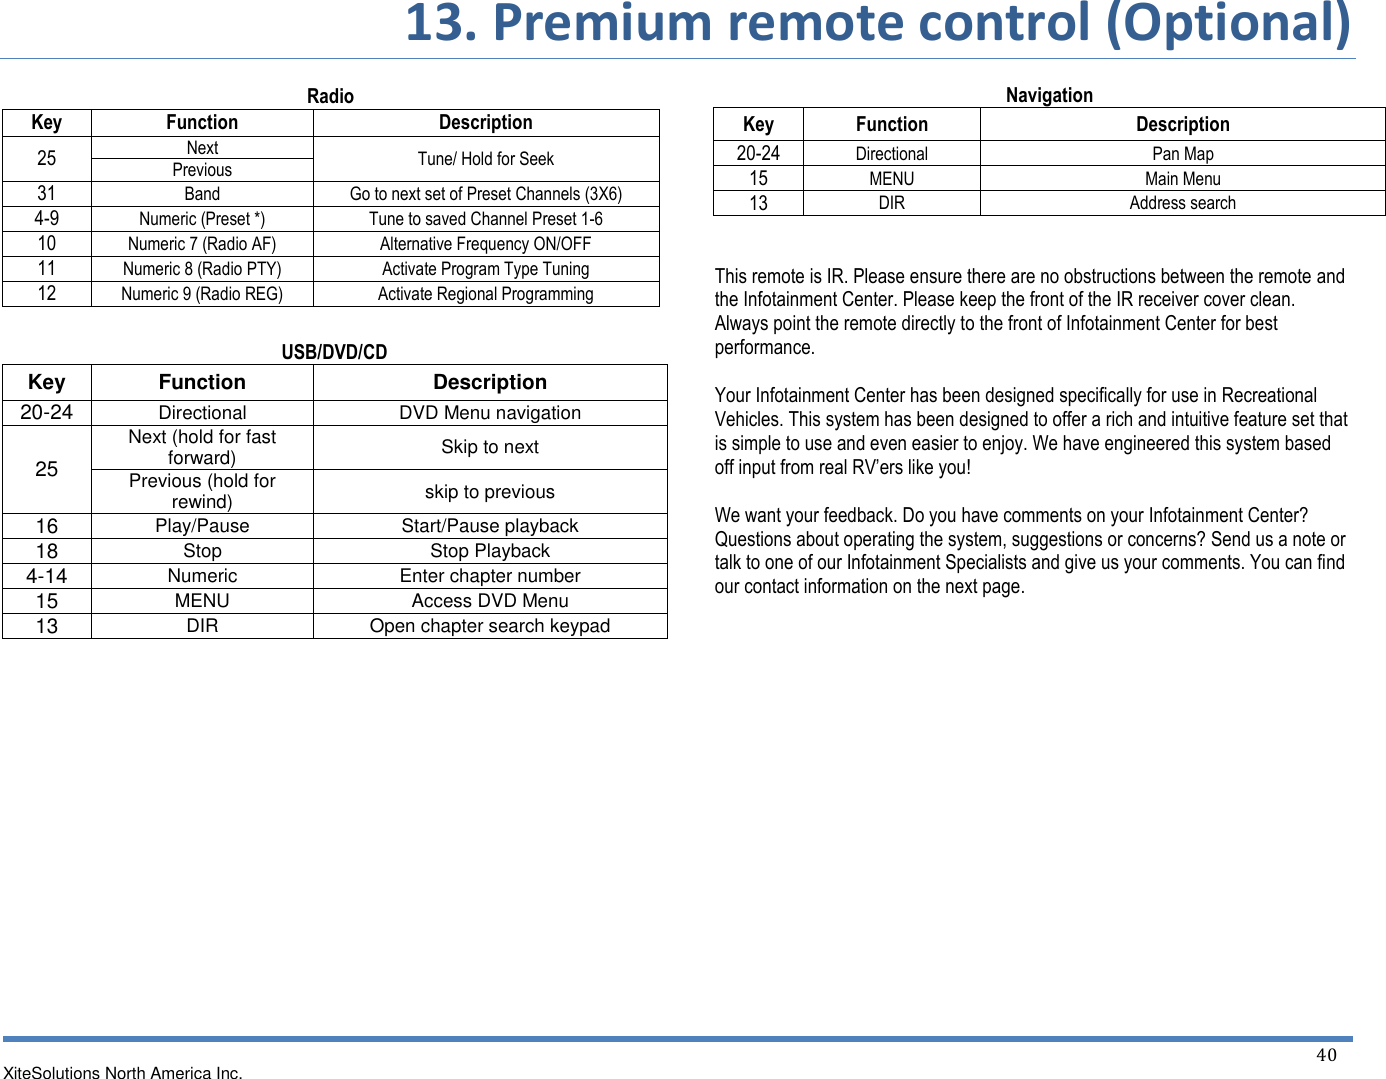       13. Premium remote control (Optional)   XiteSolutions North America Inc.    40  Radio Key Function Description 25 Next Tune/ Hold for Seek Previous 31 Band Go to next set of Preset Channels (3X6) 4-9 Numeric (Preset *) Tune to saved Channel Preset 1-6 10 Numeric 7 (Radio AF) Alternative Frequency ON/OFF 11 Numeric 8 (Radio PTY) Activate Program Type Tuning 12 Numeric 9 (Radio REG) Activate Regional Programming  USB/DVD/CD Key Function Description 20-24 Directional DVD Menu navigation 25 Next (hold for fast forward) Skip to next Previous (hold for rewind) skip to previous 16 Play/Pause Start/Pause playback 18 Stop Stop Playback 4-14 Numeric Enter chapter number 15 MENU Access DVD Menu 13 DIR Open chapter search keypad                Navigation Key Function Description 20-24 Directional Pan Map 15 MENU Main Menu 13 DIR Address search   This remote is IR. Please ensure there are no obstructions between the remote and the Infotainment Center. Please keep the front of the IR receiver cover clean. Always point the remote directly to the front of Infotainment Center for best performance.  Your Infotainment Center has been designed specifically for use in Recreational Vehicles. This system has been designed to offer a rich and intuitive feature set that is simple to use and even easier to enjoy. We have engineered this system based off input from real RV’ers like you!  We want your feedback. Do you have comments on your Infotainment Center? Questions about operating the system, suggestions or concerns? Send us a note or talk to one of our Infotainment Specialists and give us your comments. You can find our contact information on the next page.          